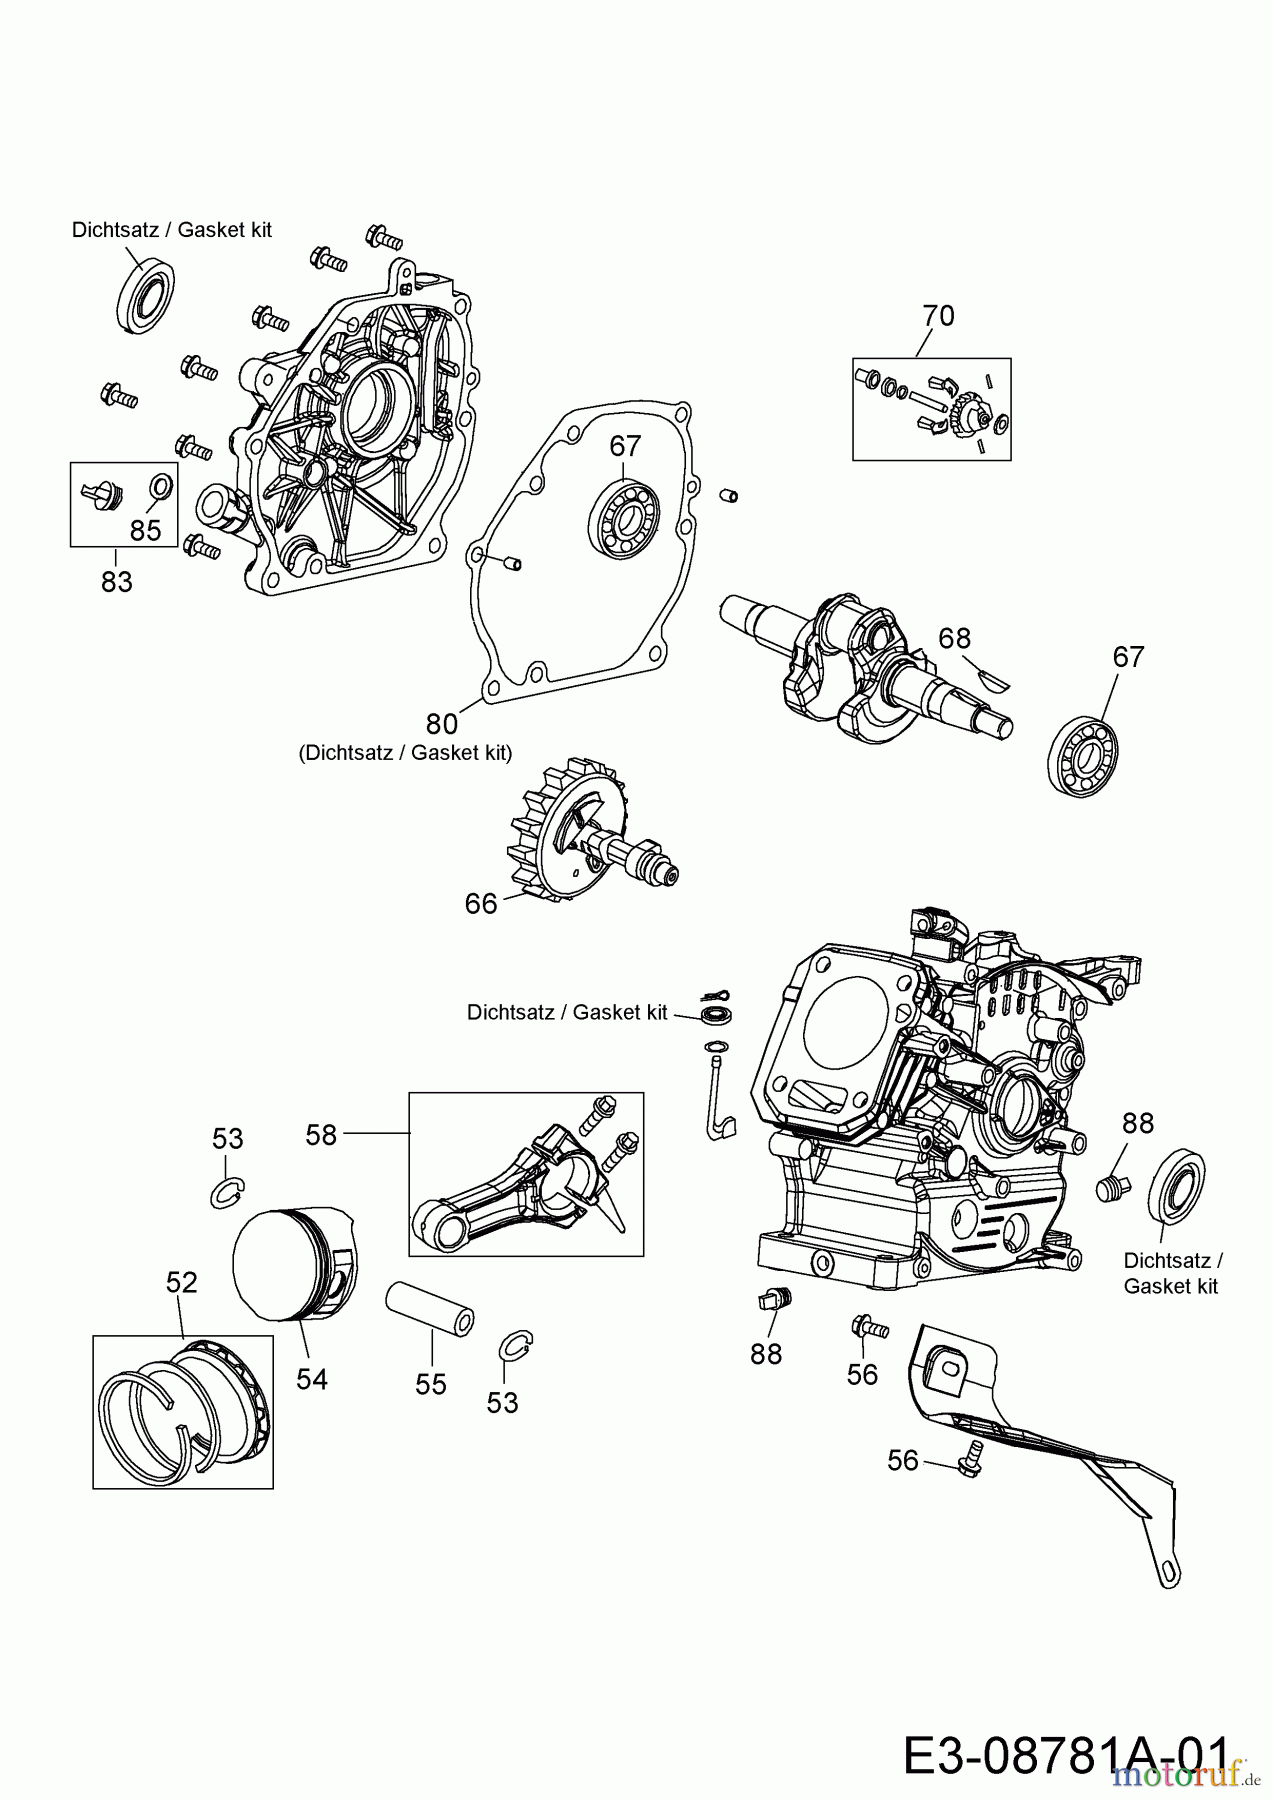  MTD-Engines Horizontal 170-DH 752Z170-DH  (2014) Piston, Camshaft, Connecting rod, Governor